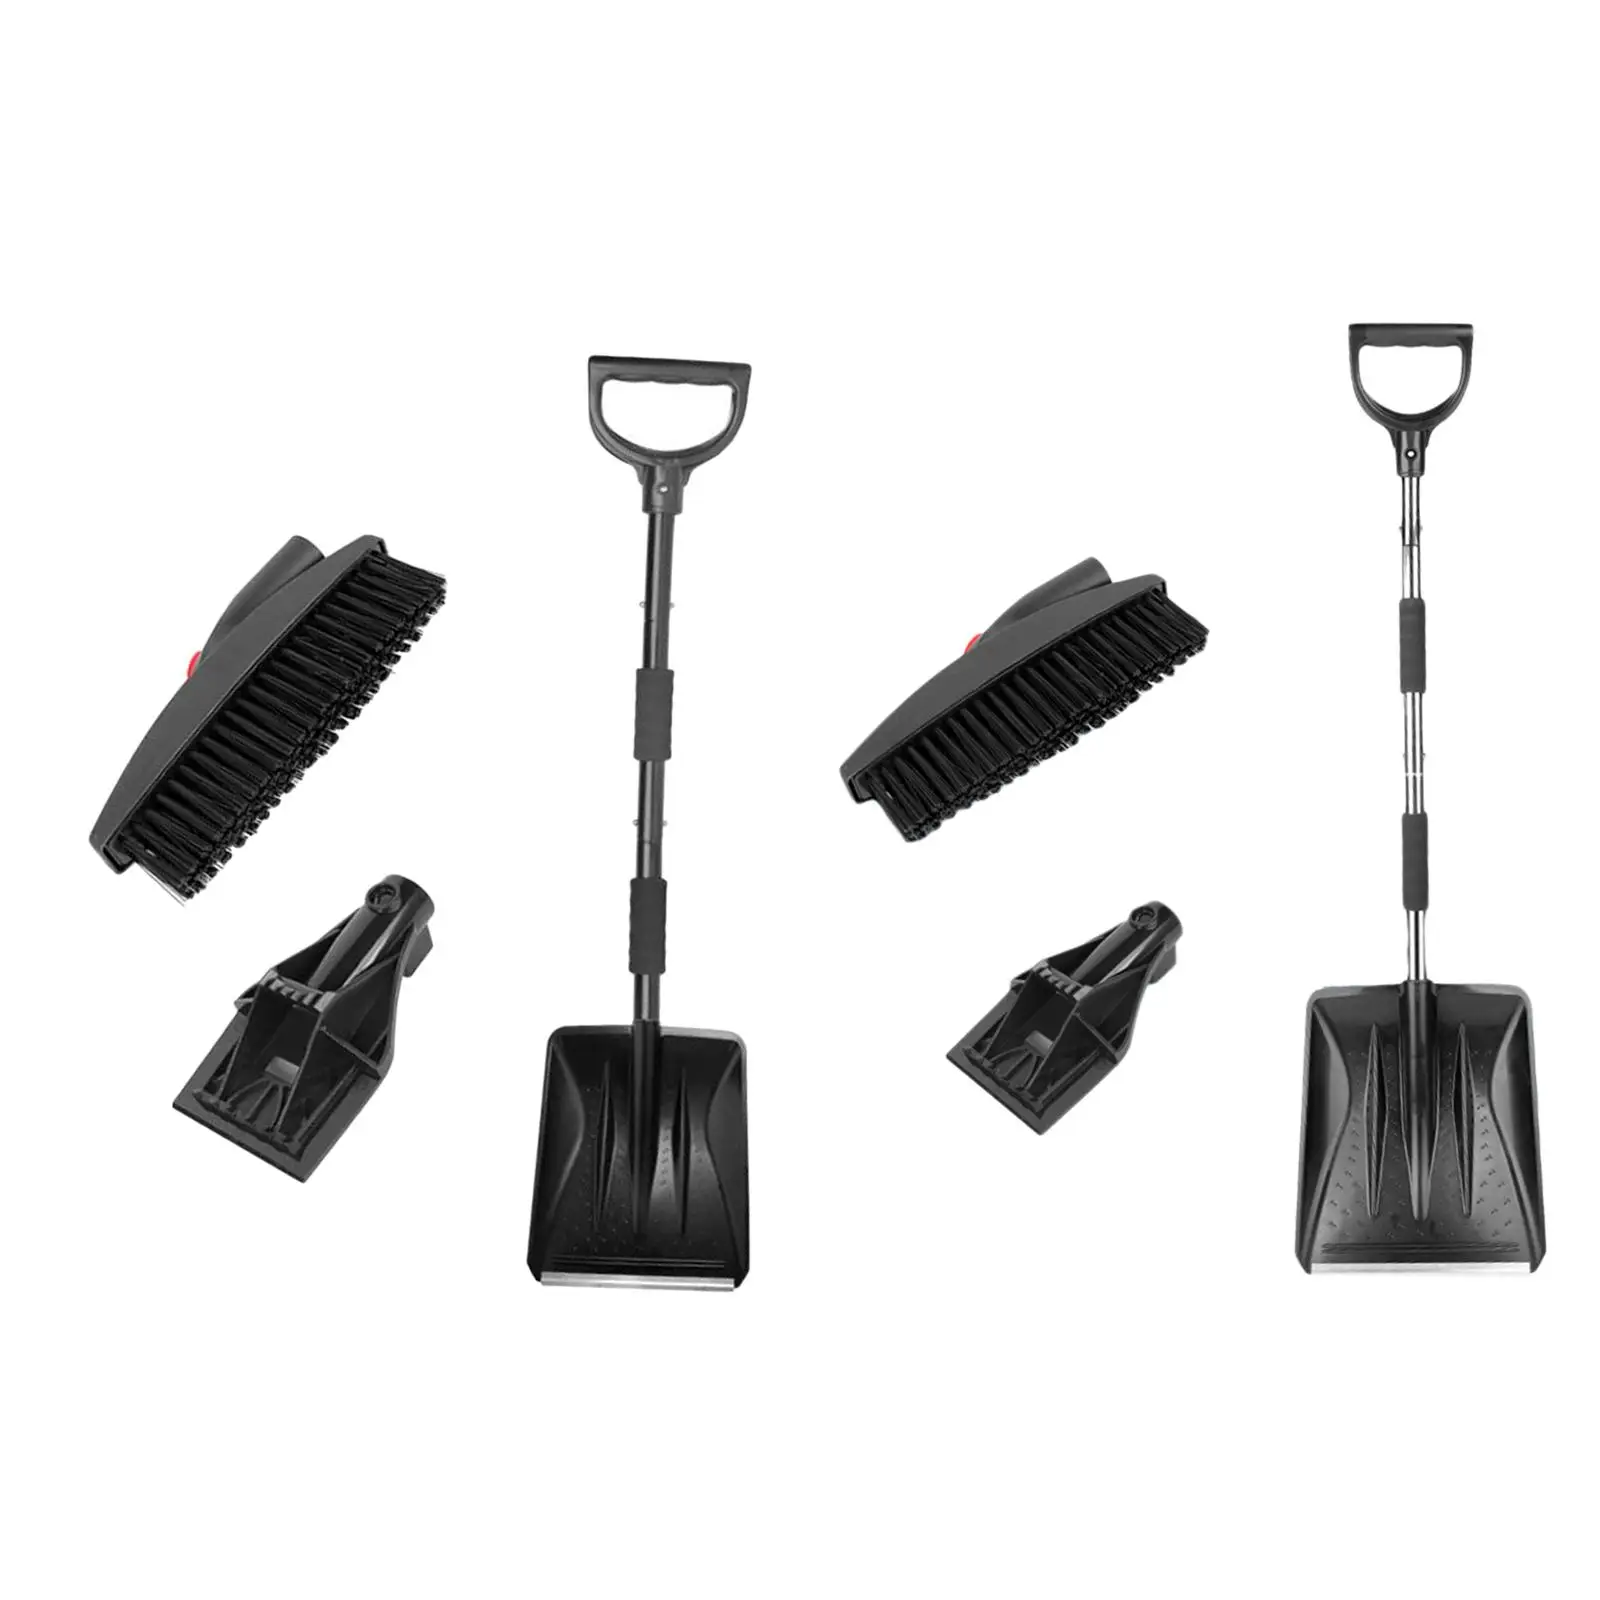 Snow Brush Snow Spade for Car, Snow Removal Tools 360 Degree Rotating Head Car Window Snow Cleaner for Auto Car